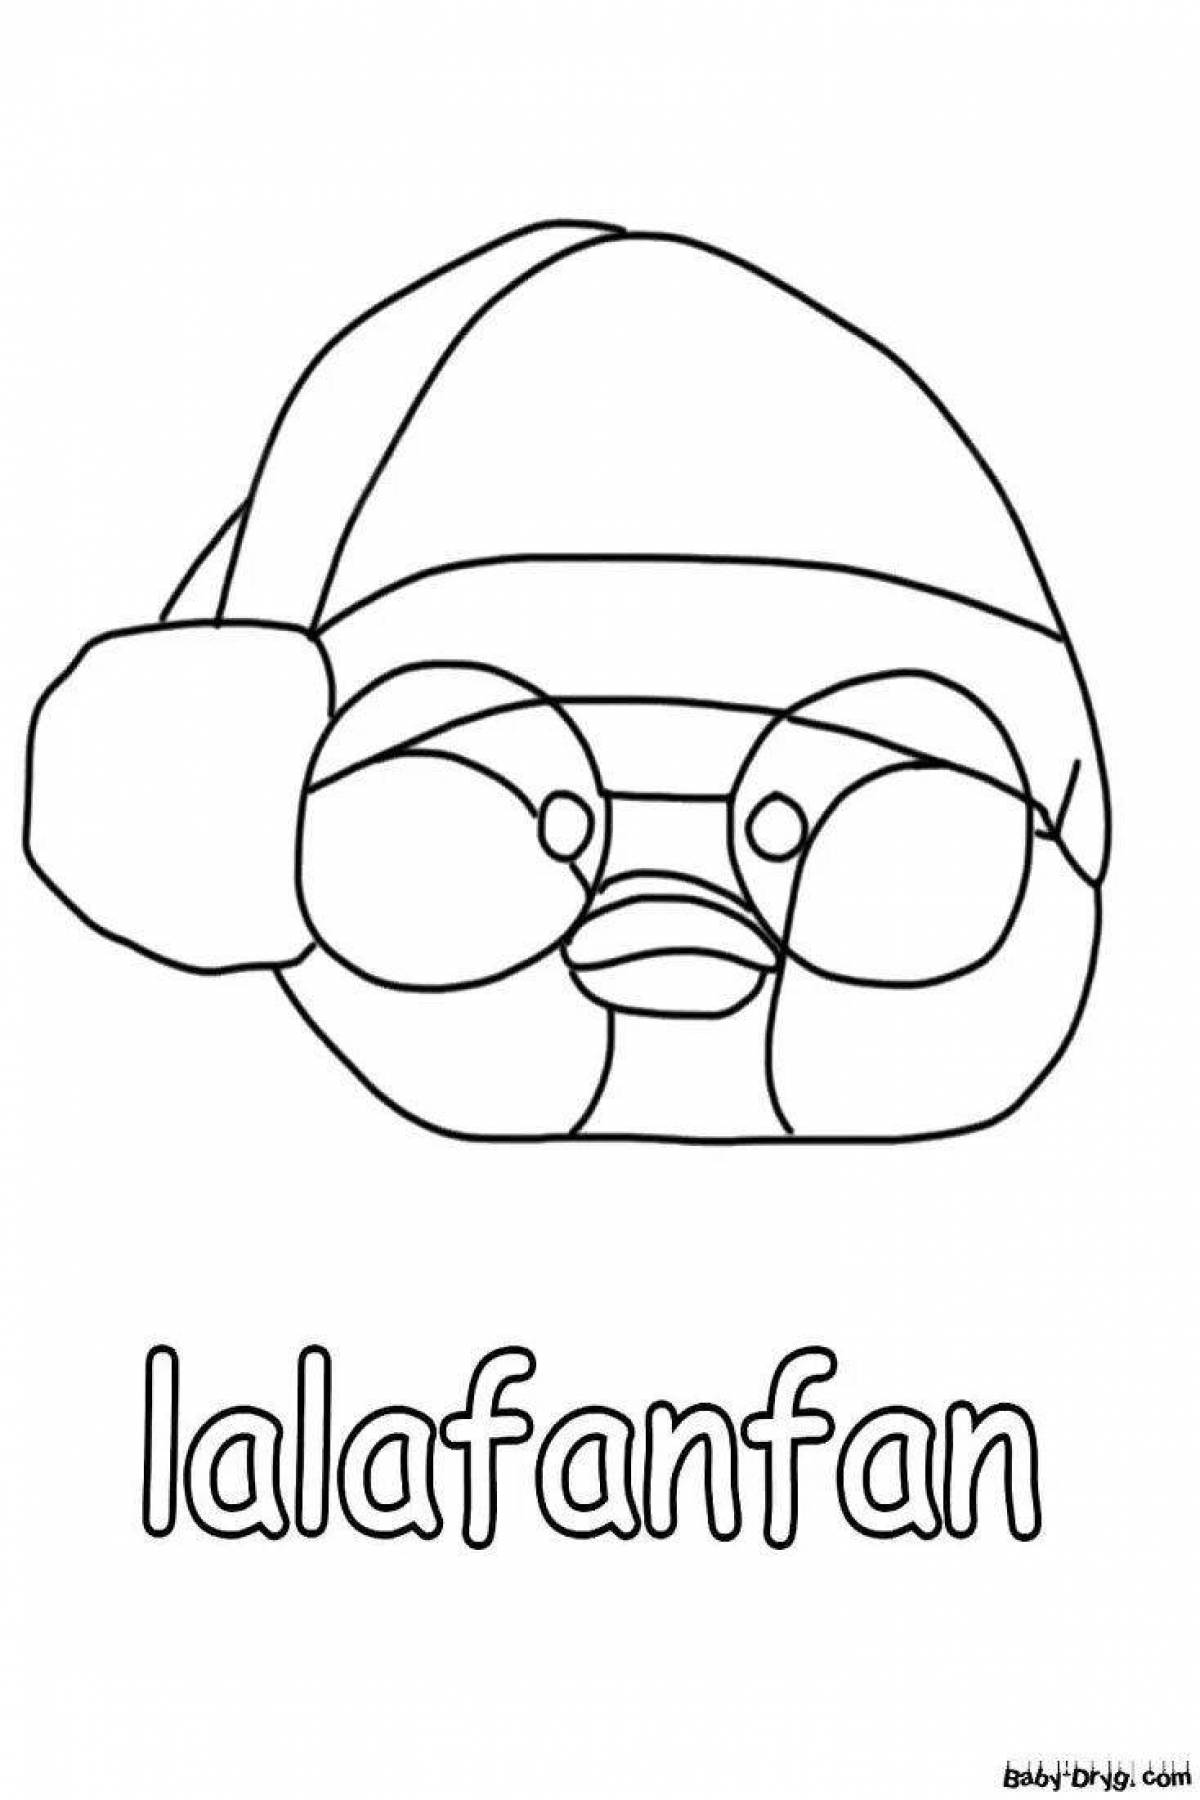 Lalafana's charming fan coloring page